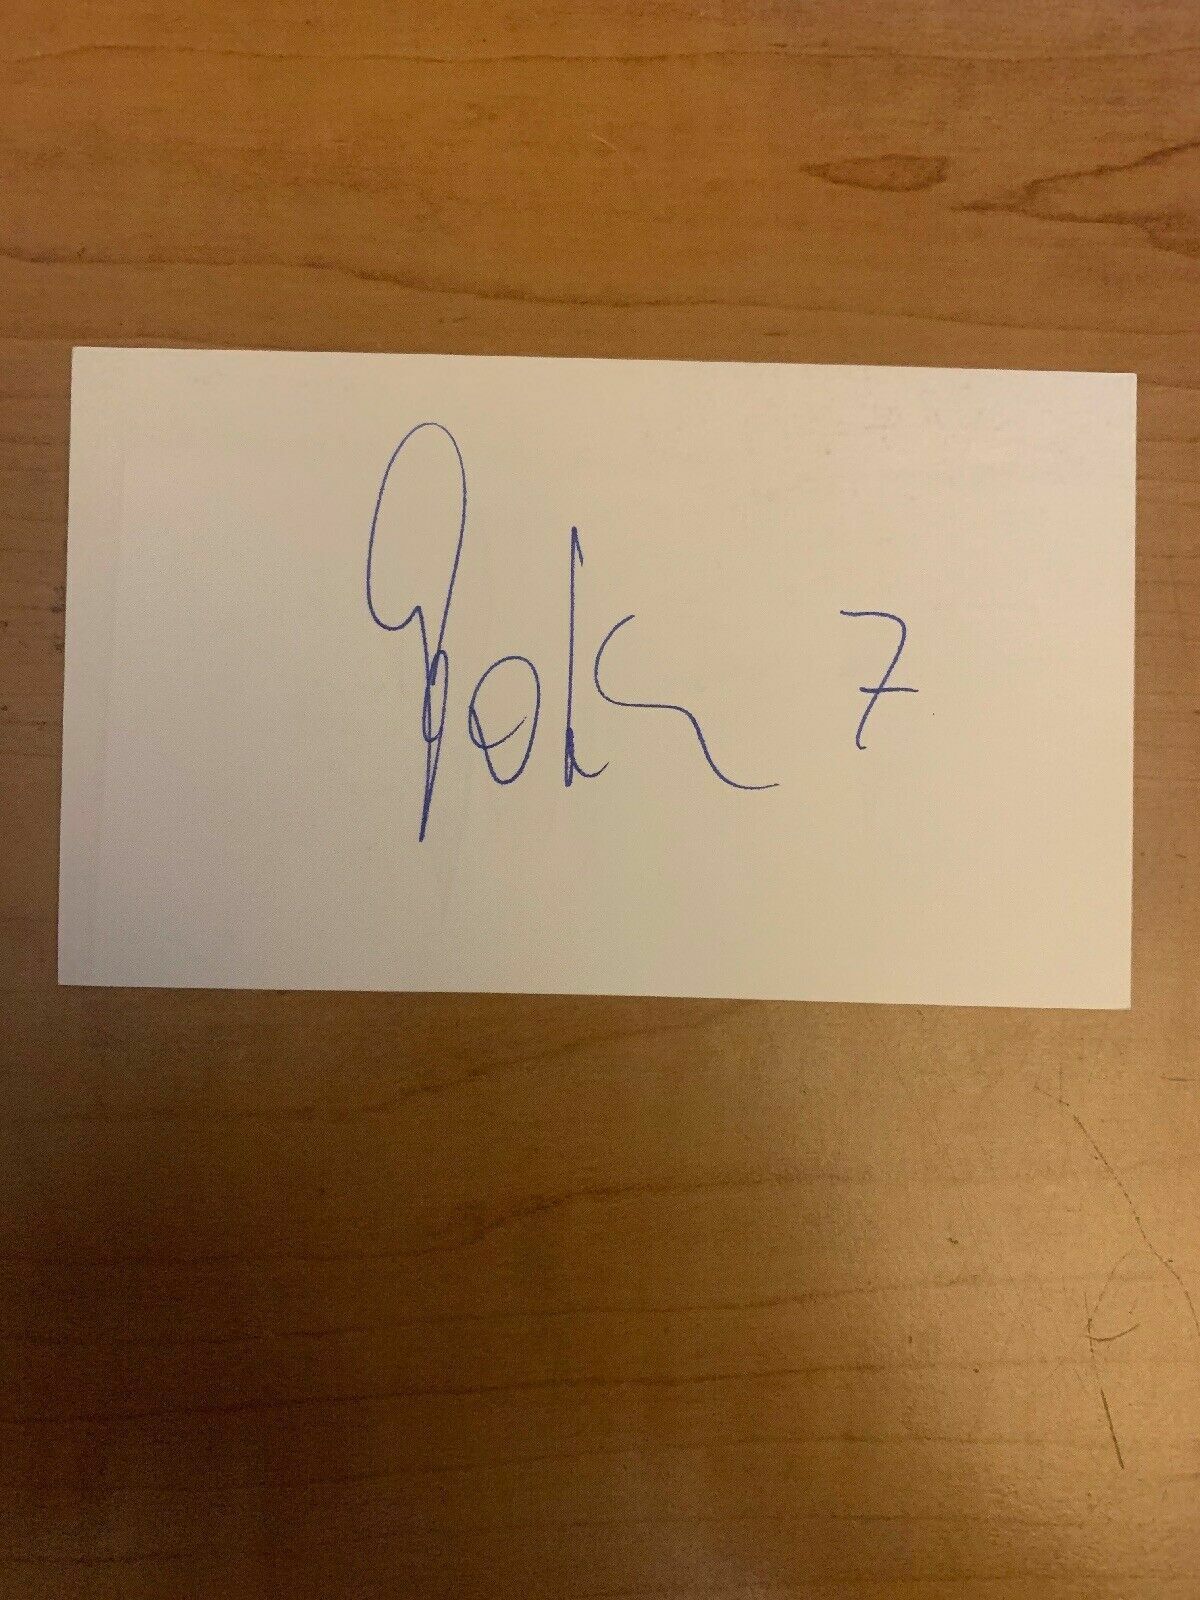 MARTIN GROTH - SOCCER - AUTOGRAPH SIGNED - INDEX CARD - AUTHENTIC- B6735